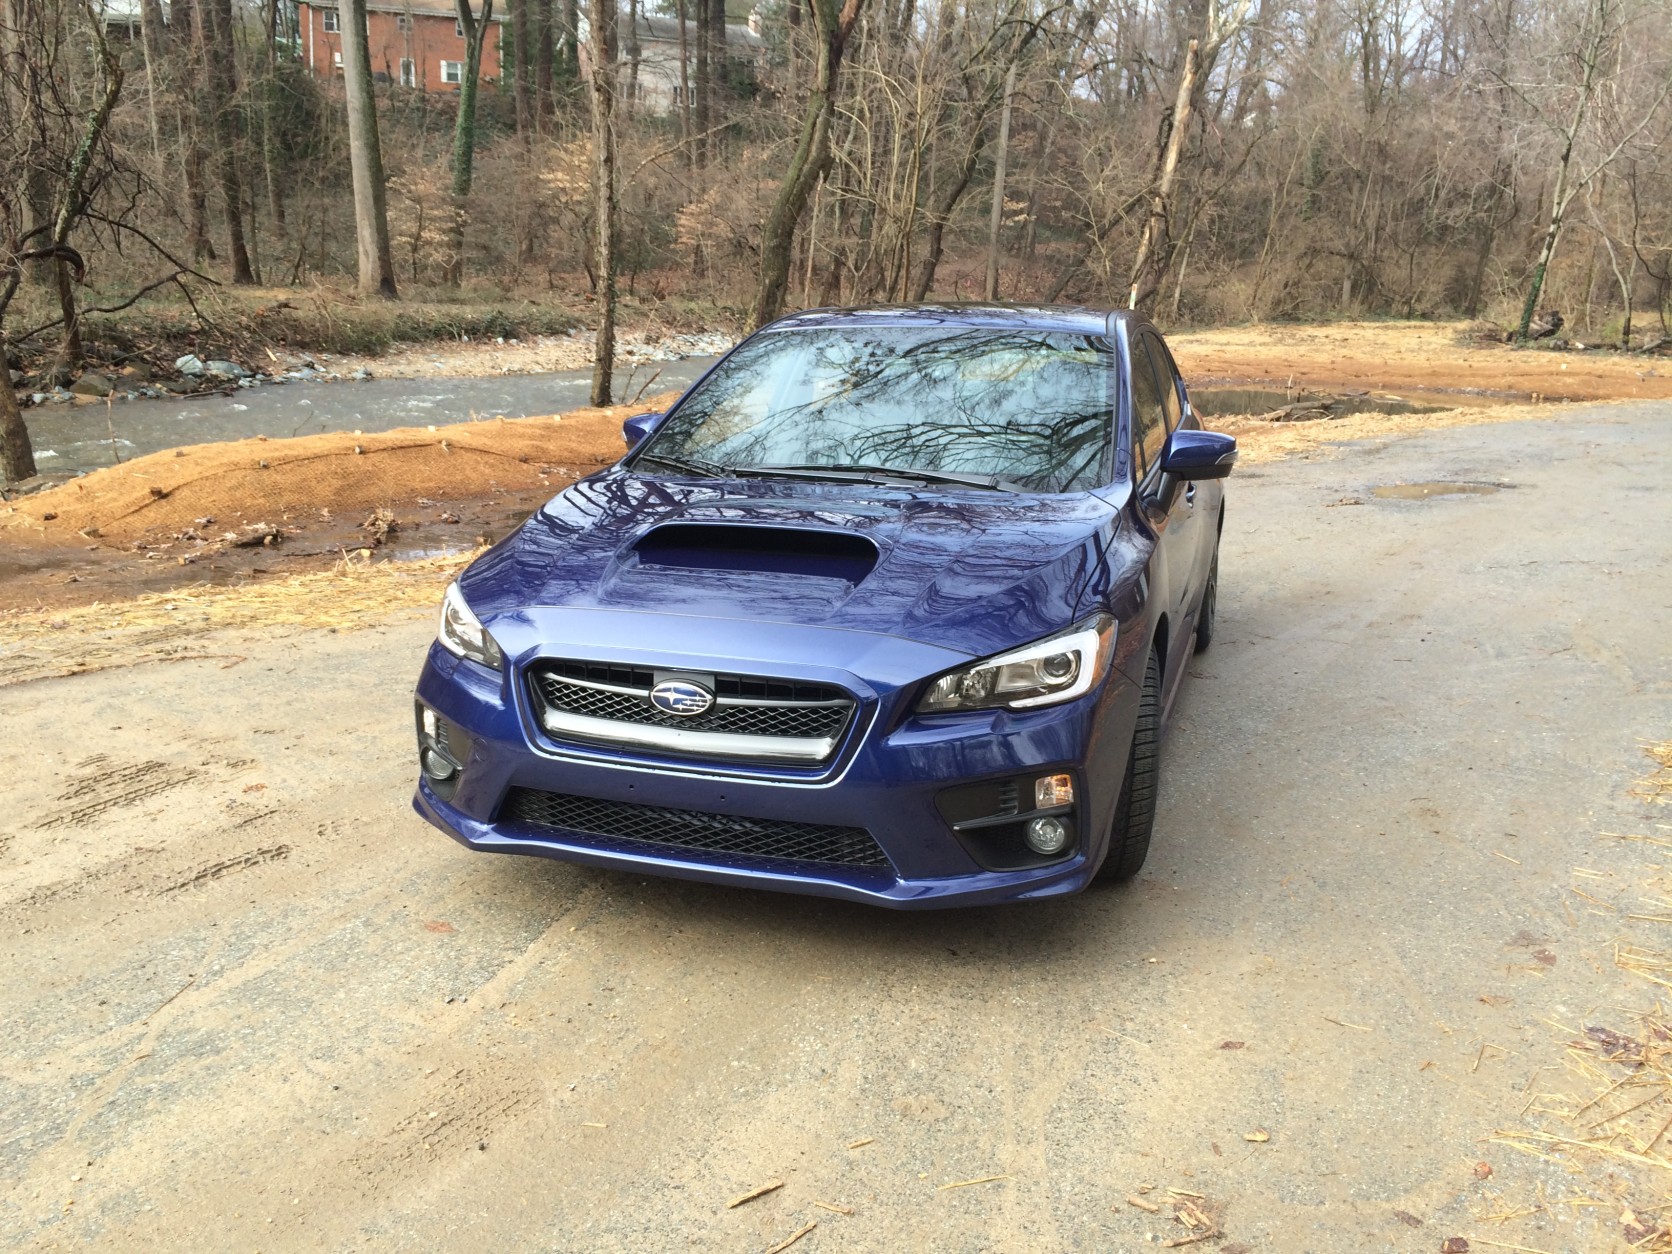 The hood scoop is still there letting fresh air into the intercooler and a staple for the WRX. (WTOP/Mike Parris)